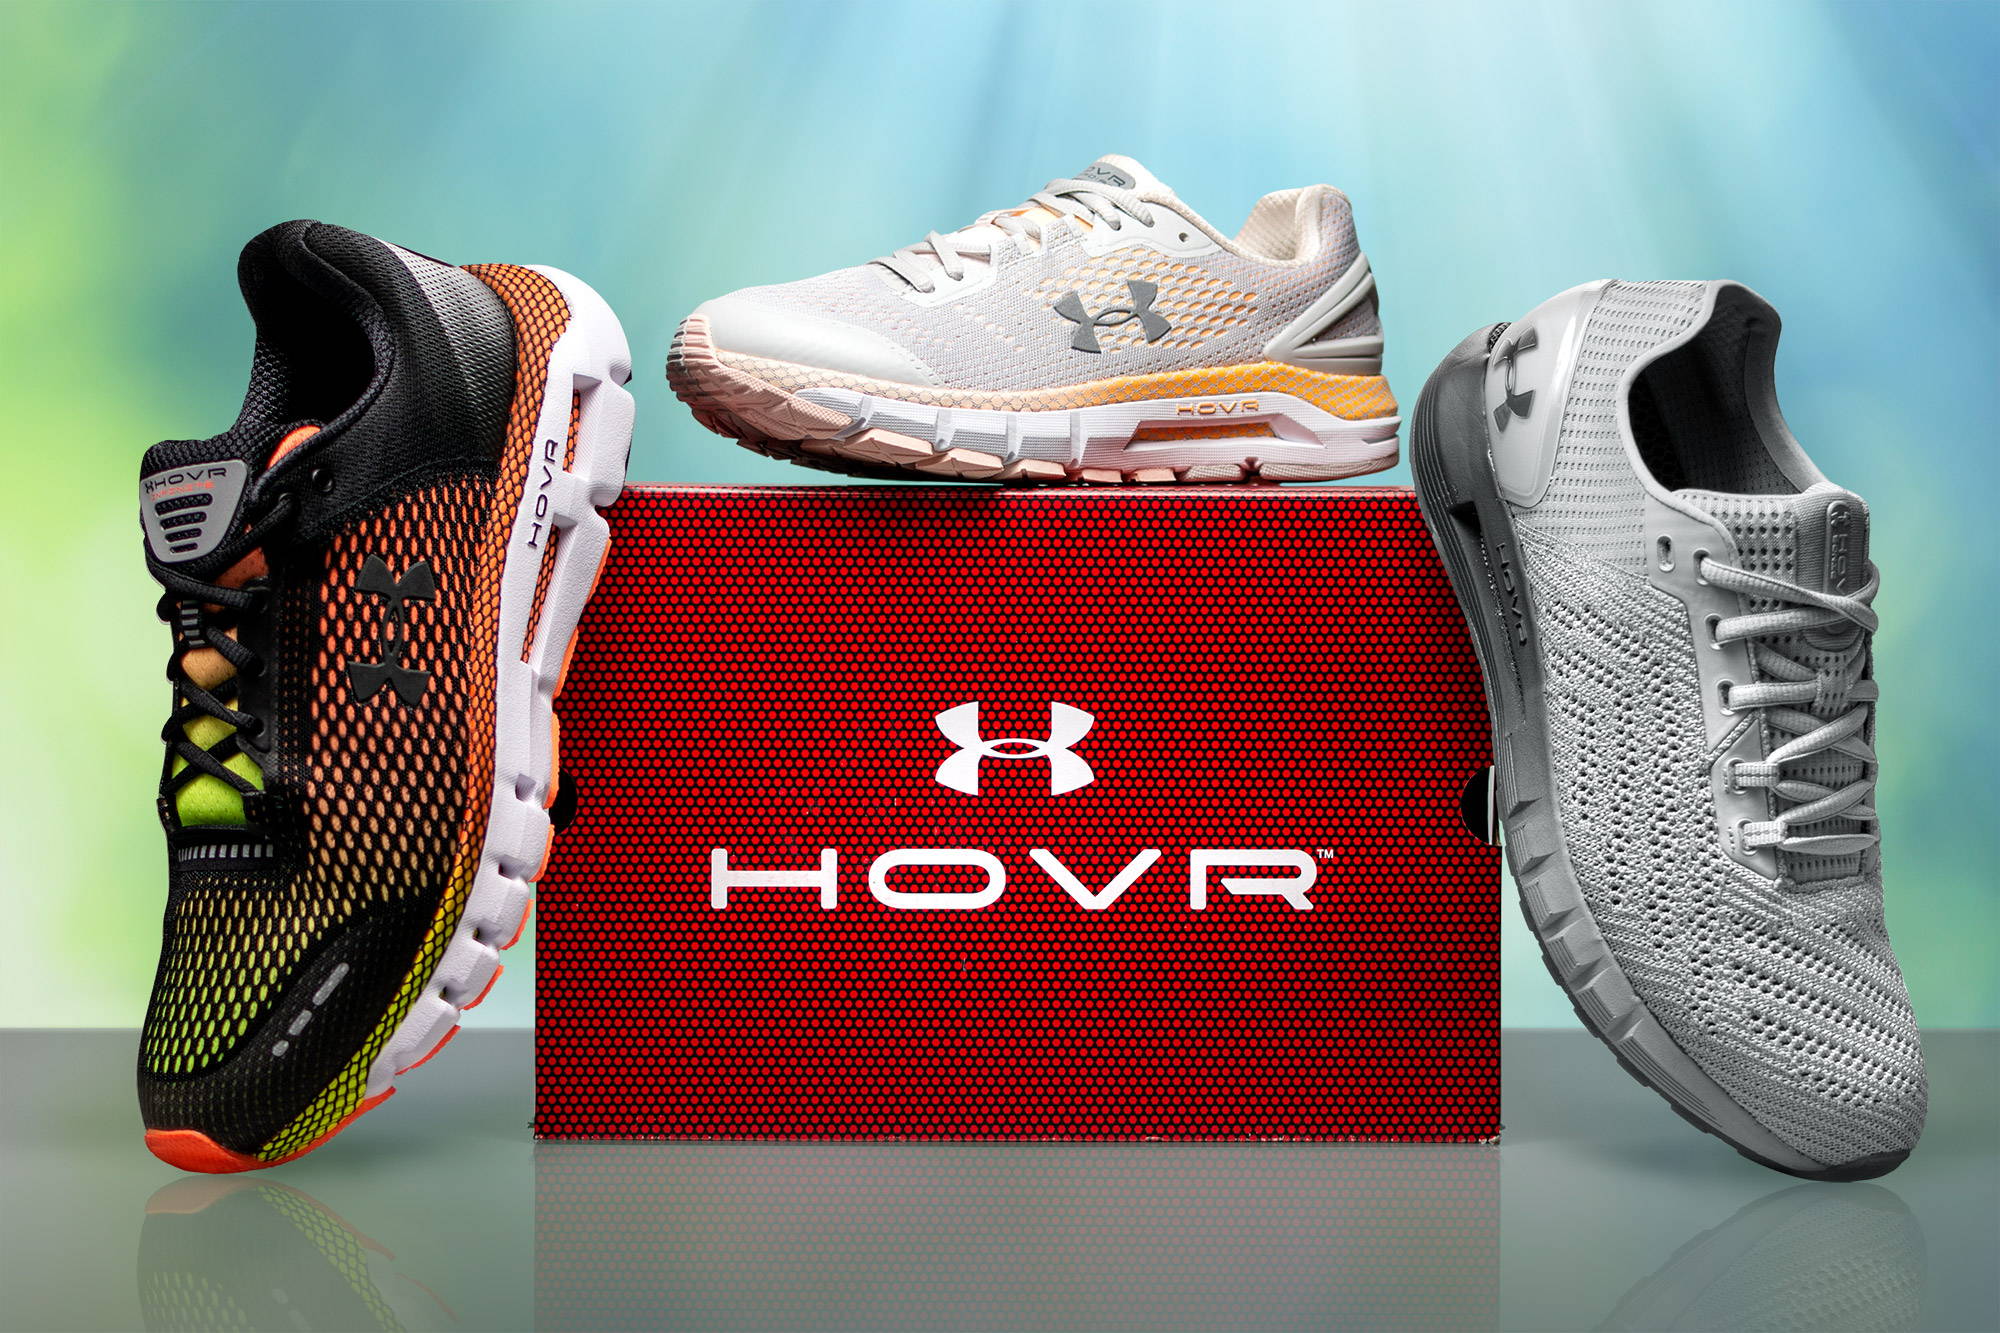 Under Armour HOVR Series Running Shoes Let Leave Your Ph – Holabird Sports